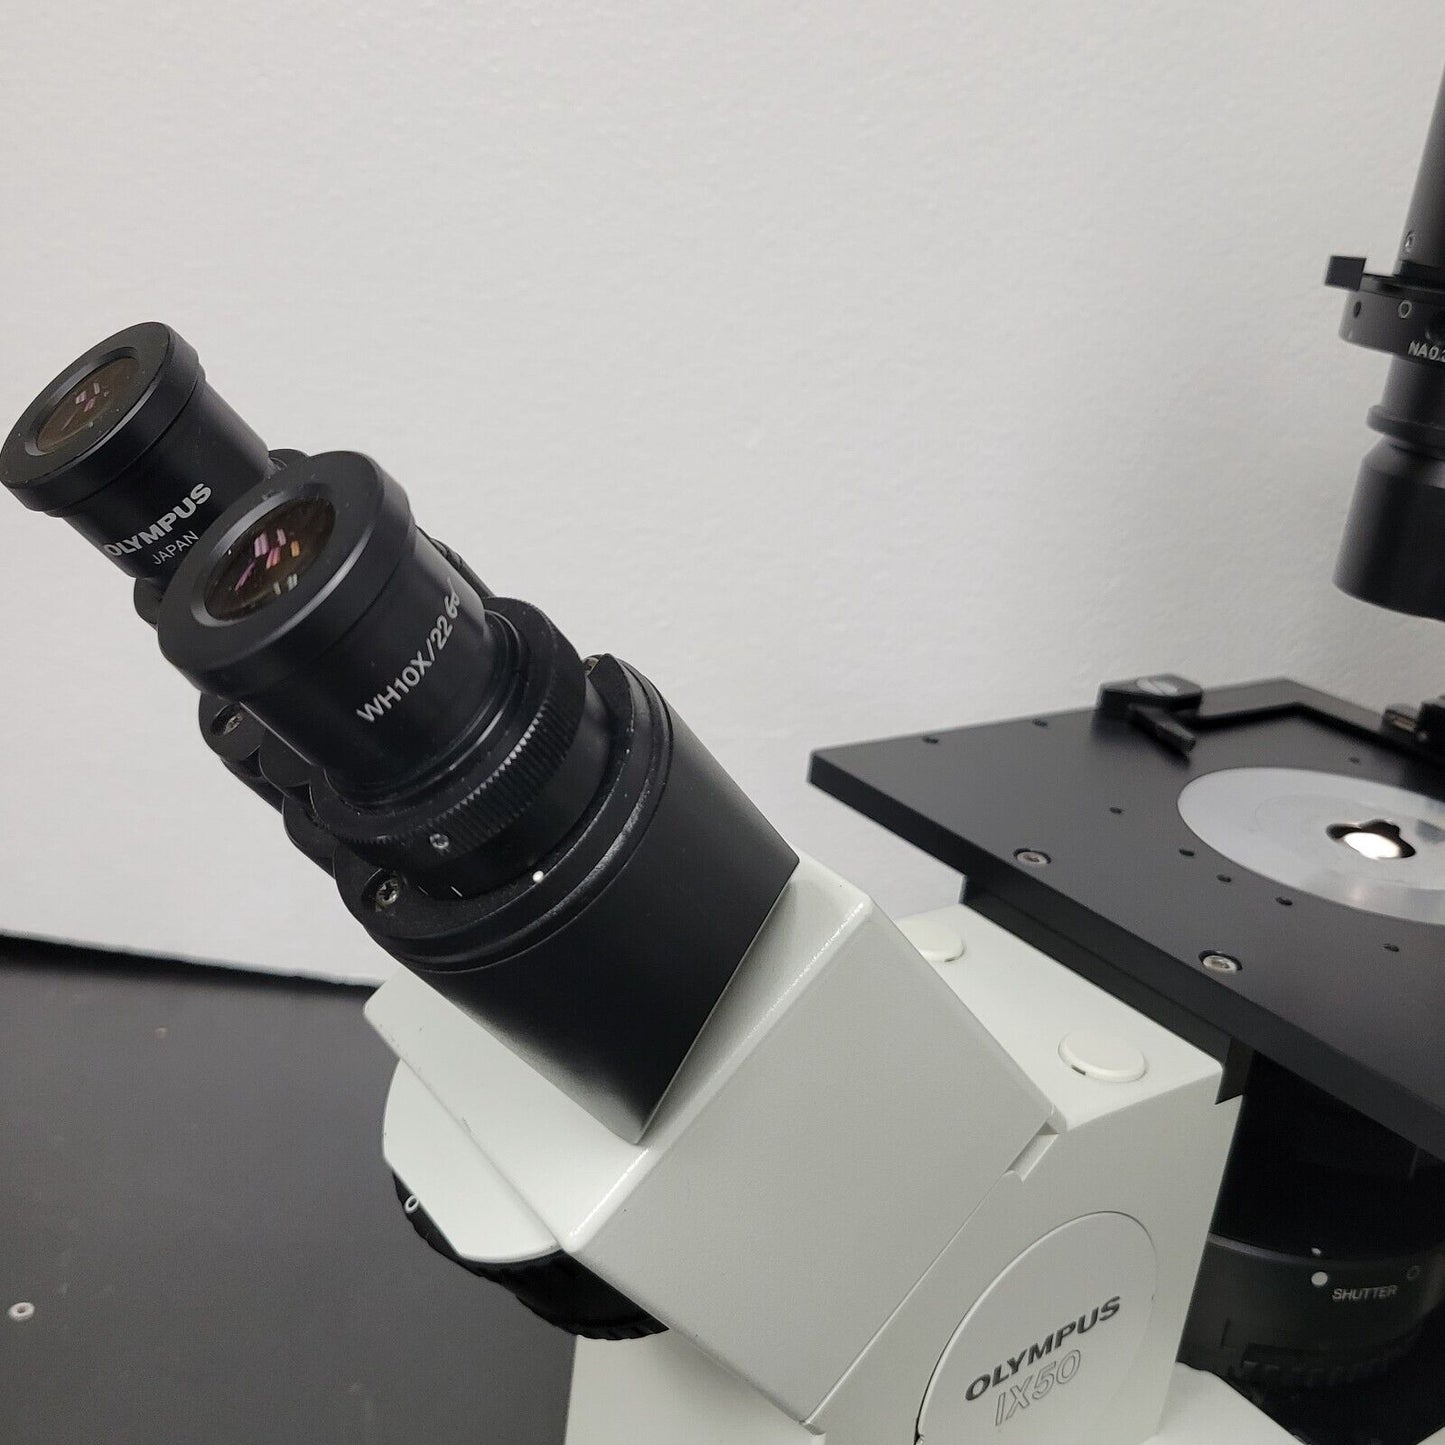 Olympus Microscope IX50 with Fluorescence, Phase Contrast, & Fluorite Objectives - microscopemarketplace